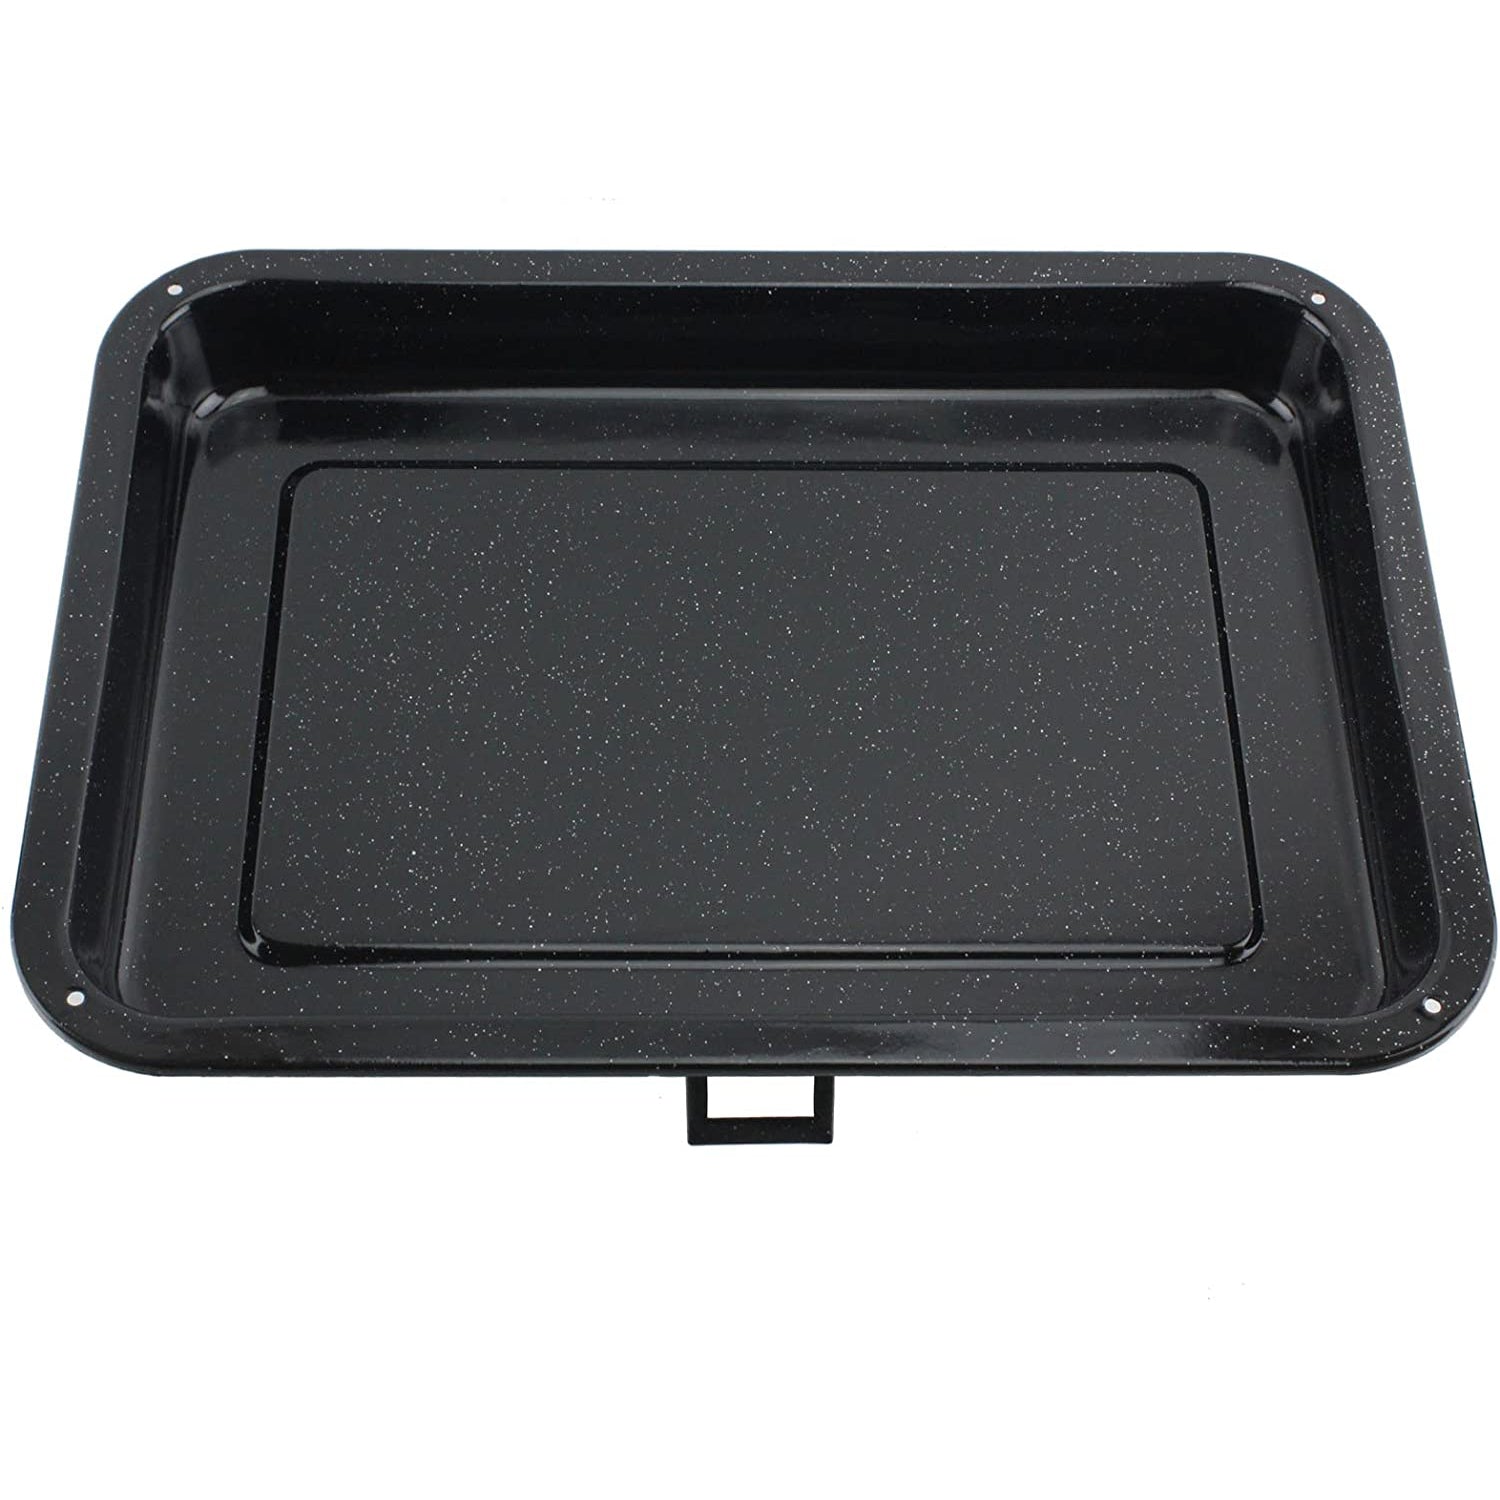 UNIVERSAL Small Grill Pan + Rack and Detachable Handle for Oven Cooker